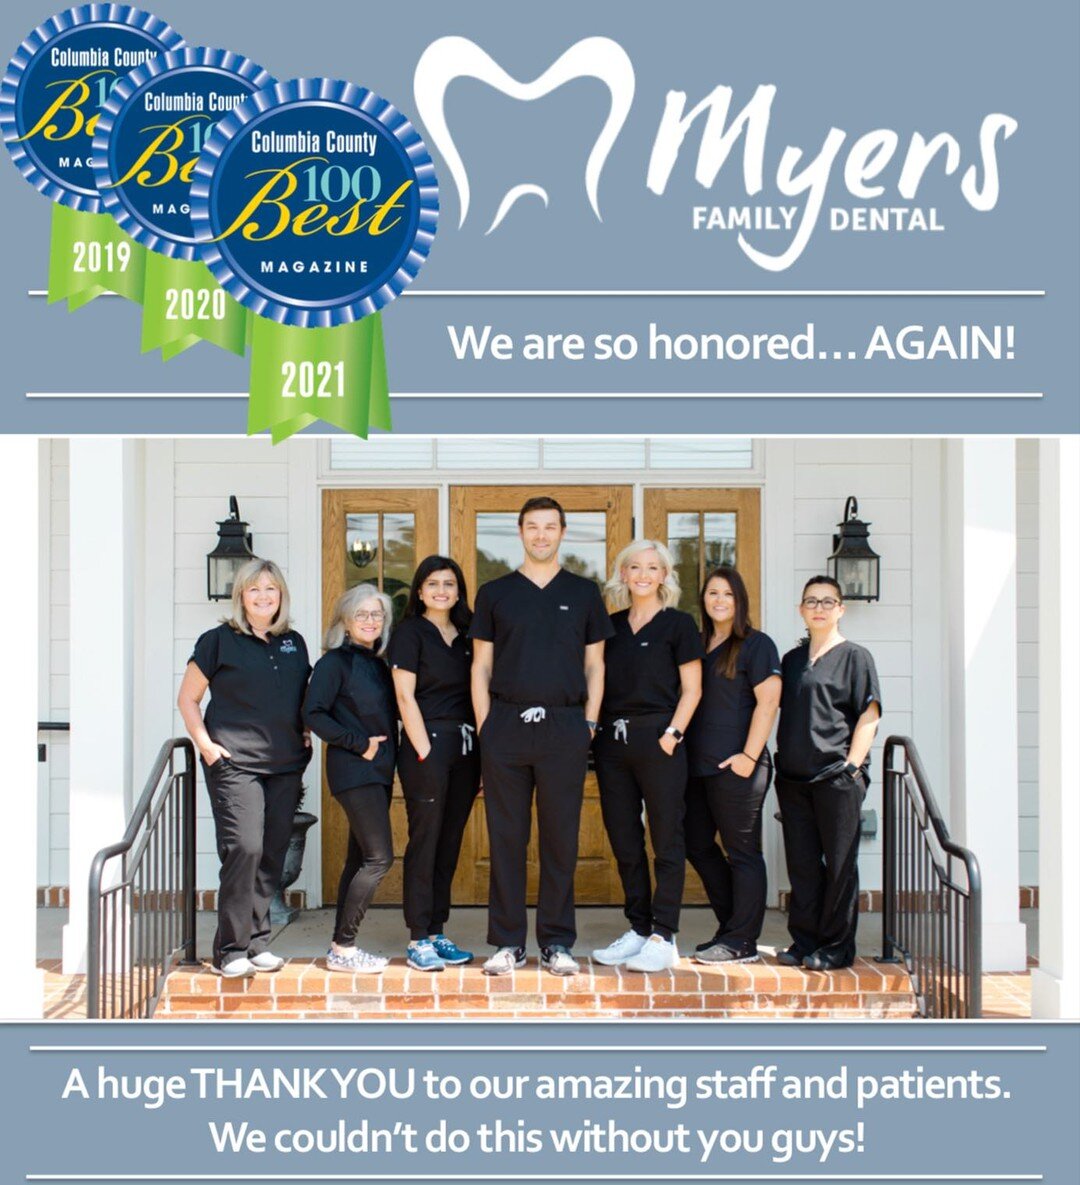 Three years in a row&hellip; We can&rsquo;t even believe it! Thank you, thank you, thank you!!! #ColumbiaCountyMagazine #100Best2021 #MyersFamilyDental